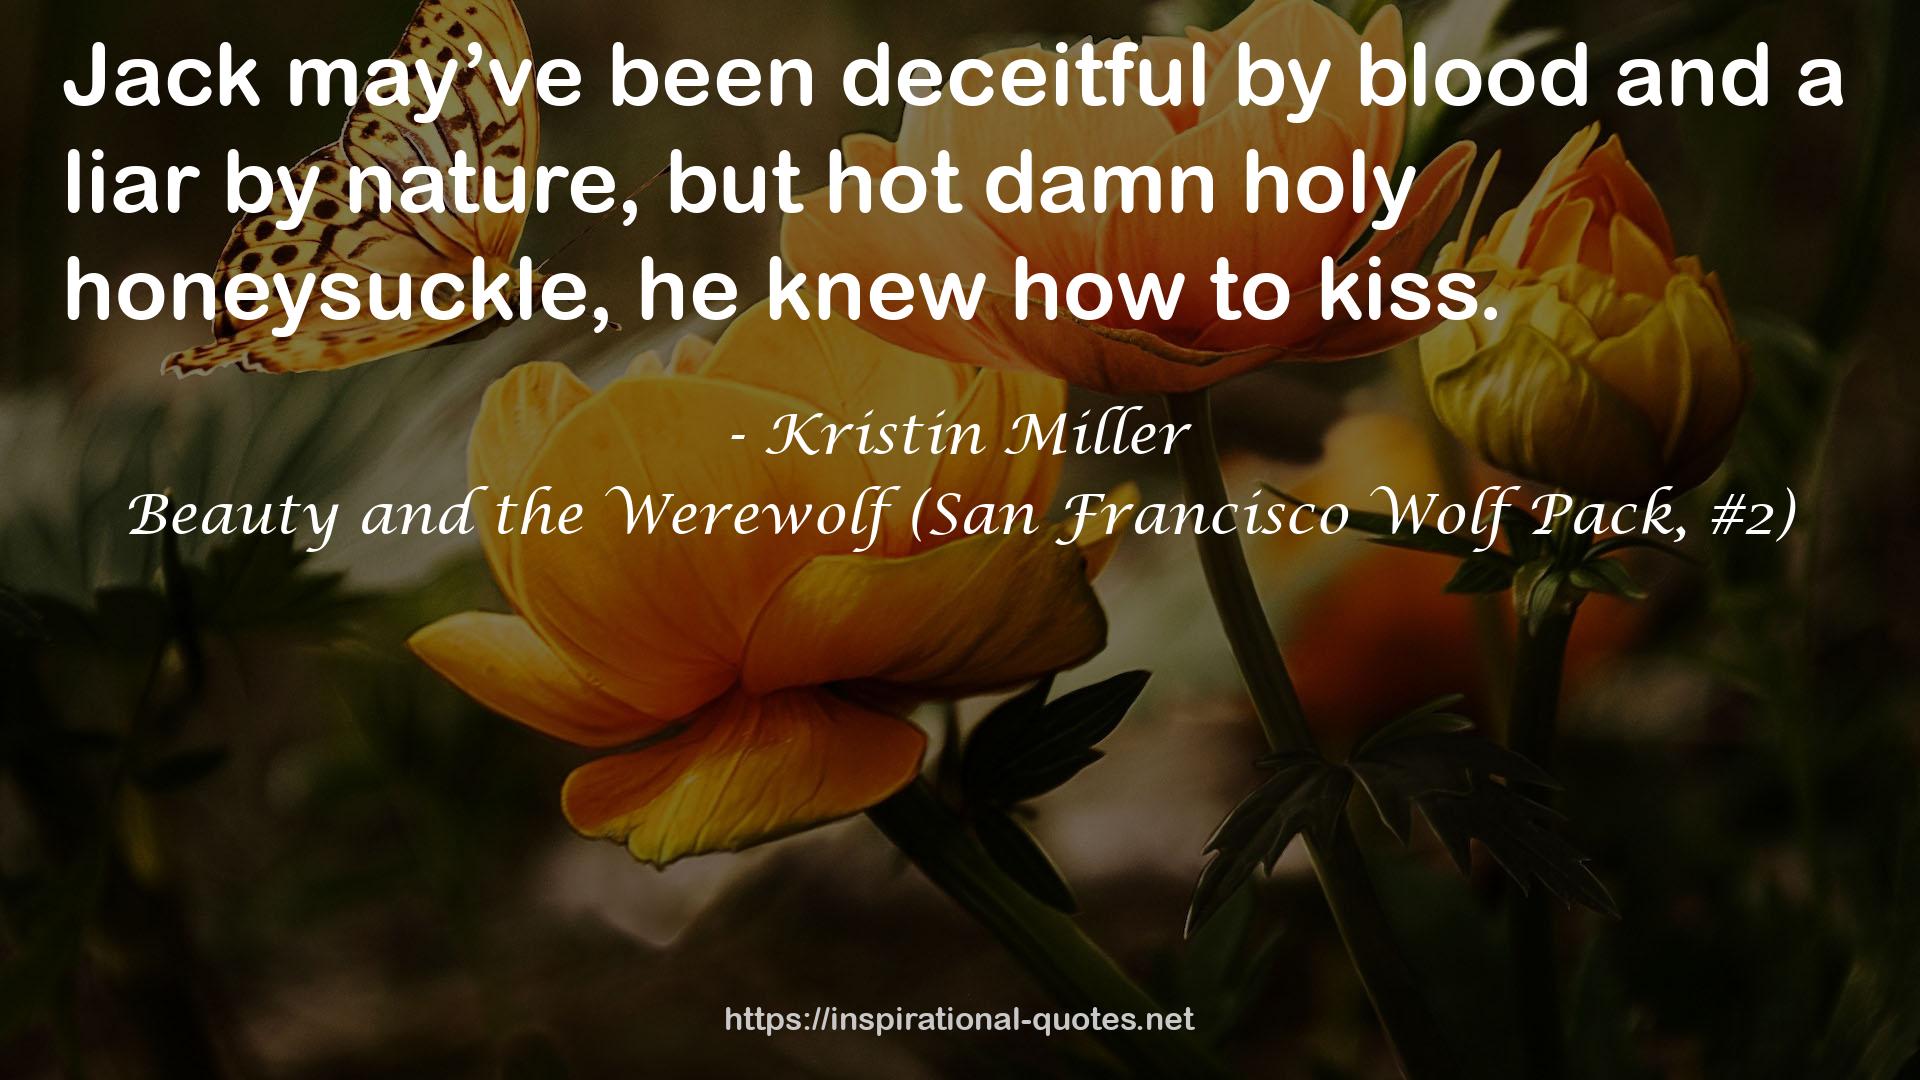 Beauty and the Werewolf (San Francisco Wolf Pack, #2) QUOTES